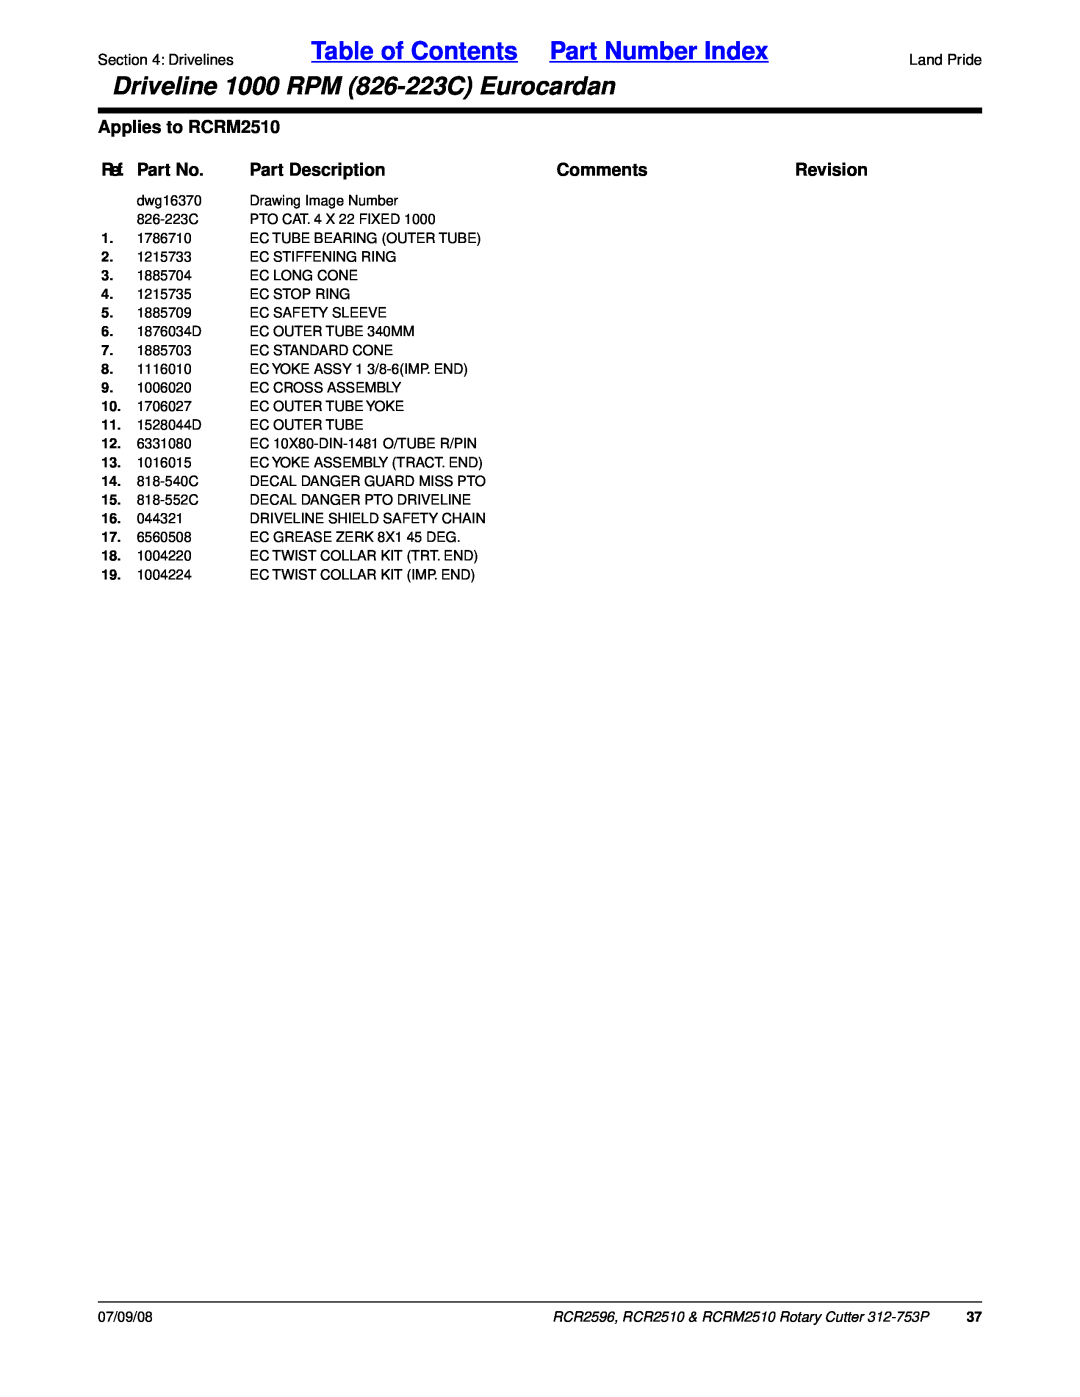 Land Pride Table of Contents Part Number Index, Driveline 1000 RPM 826-223CEurocardan, Applies to RCRM2510, Comments 